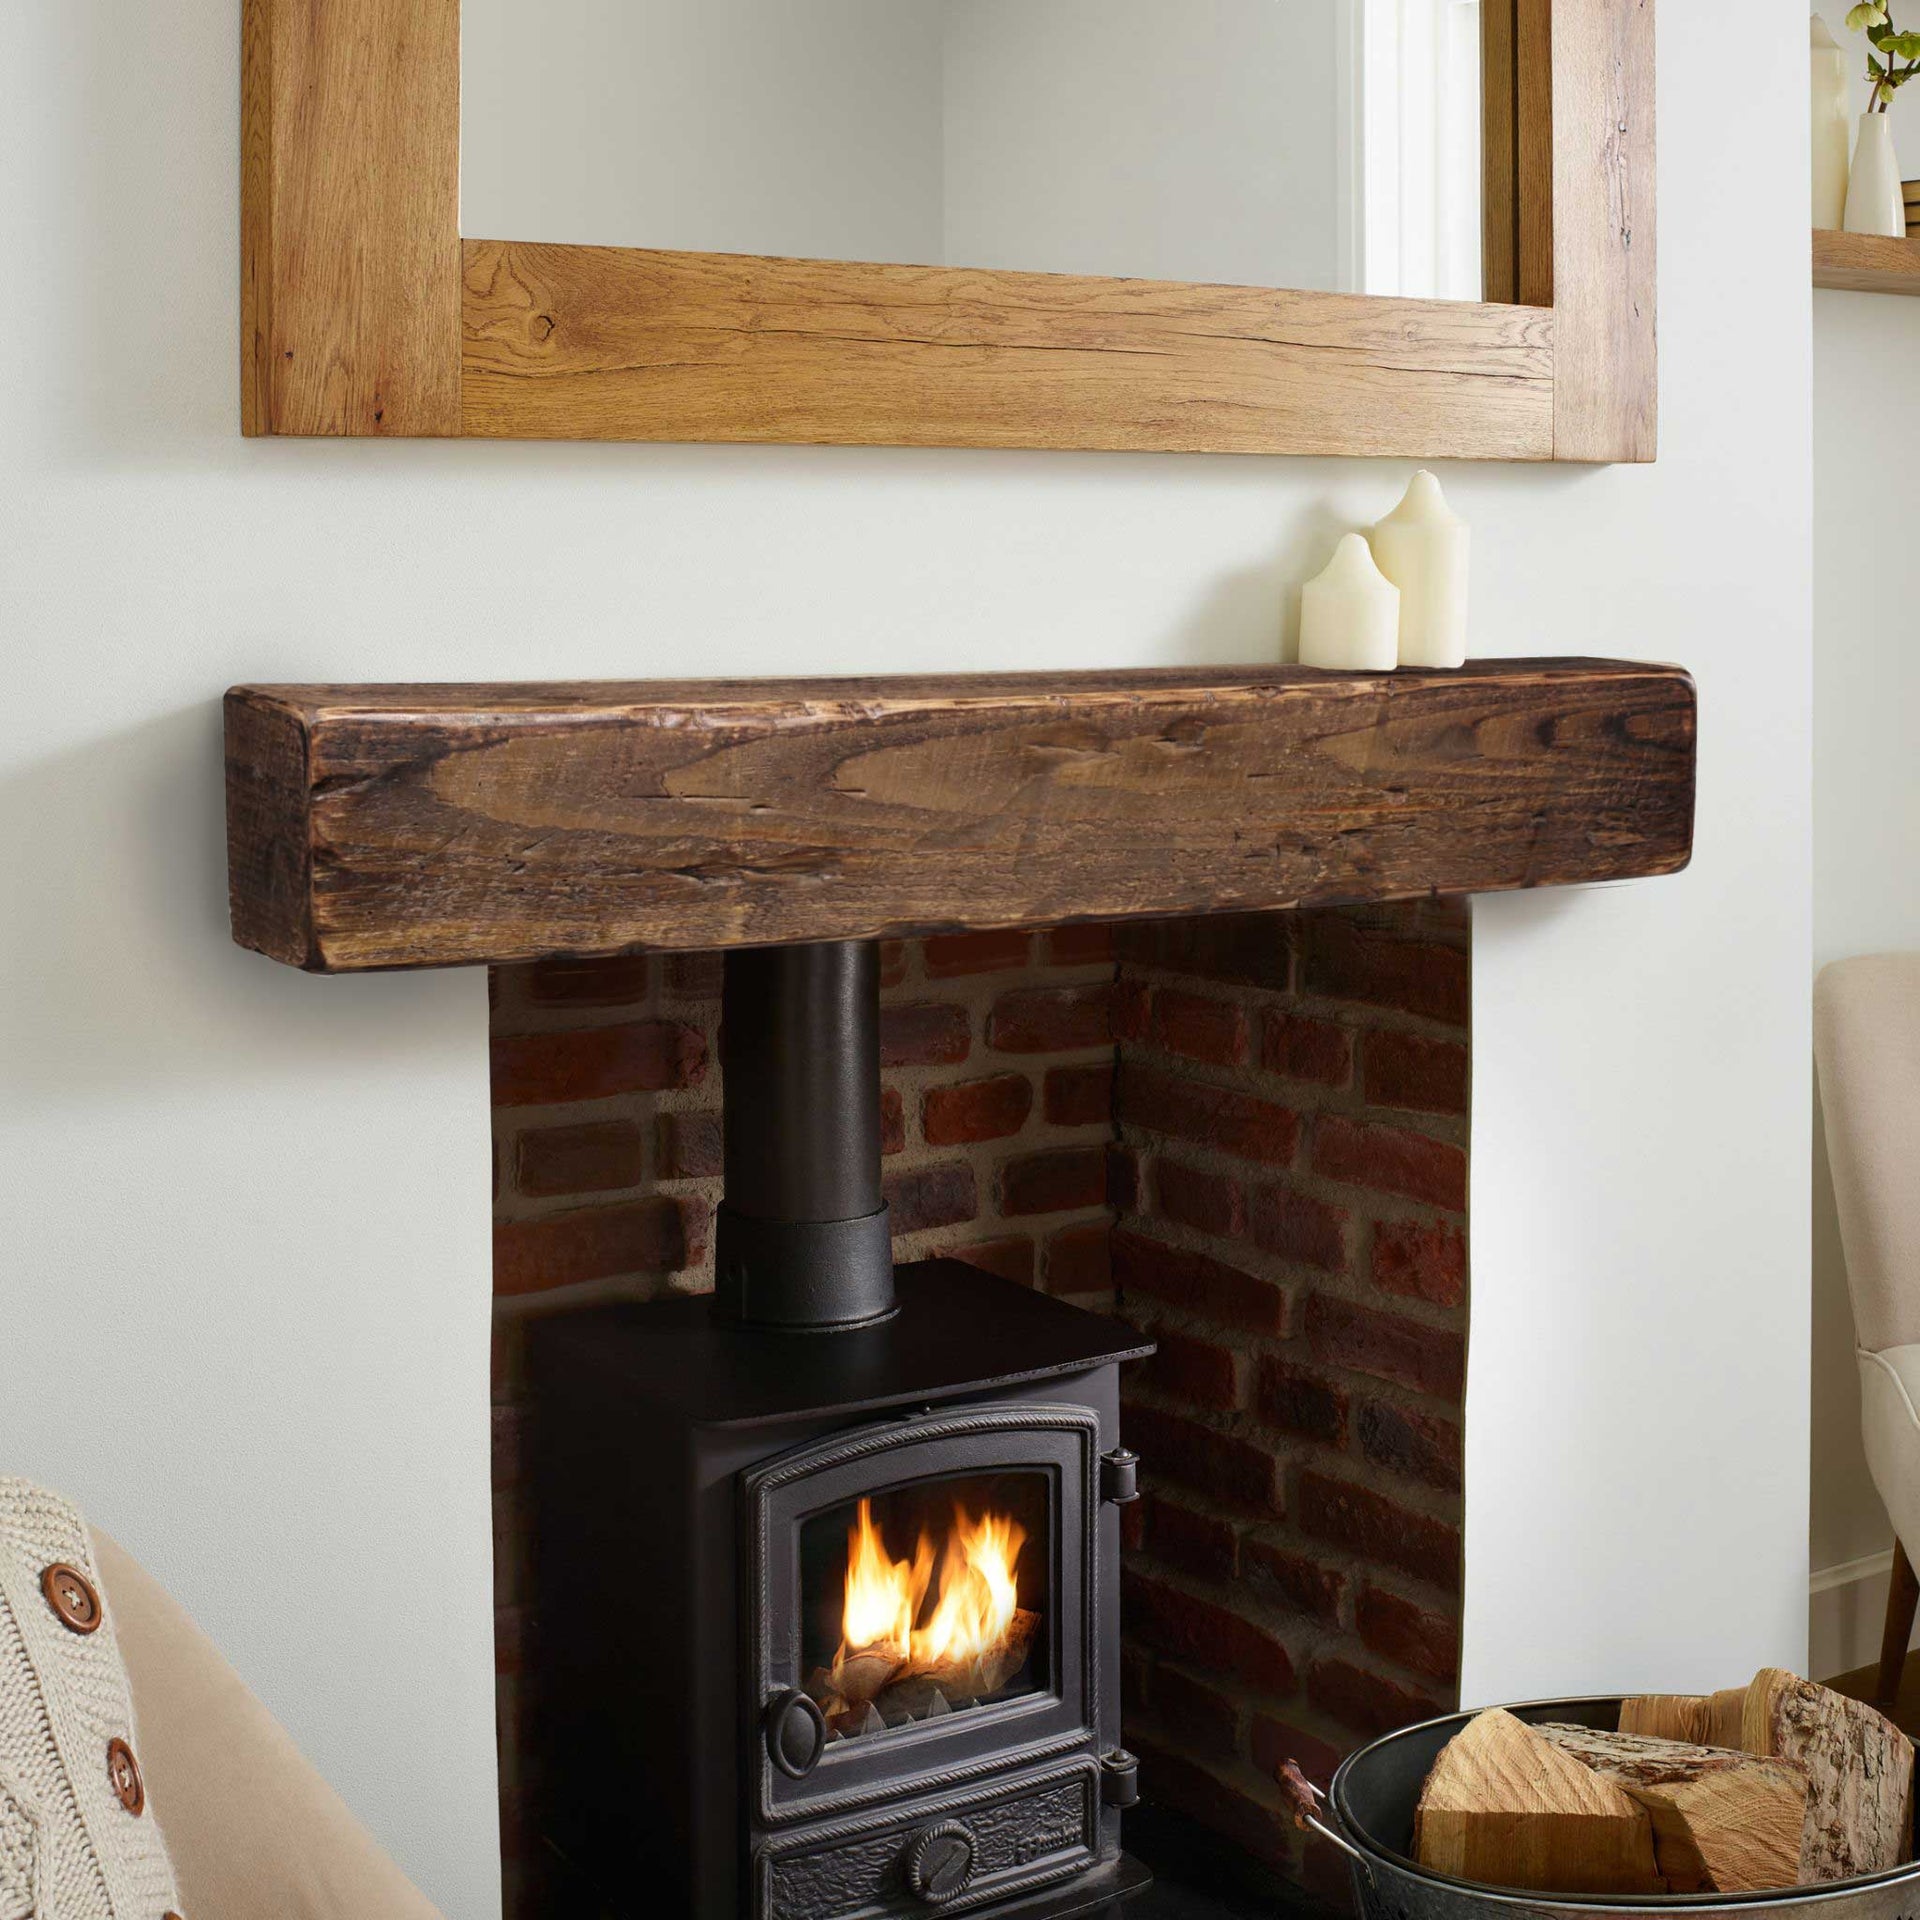 A Rustic floating mantel above a wood burning stove fireplace insert 